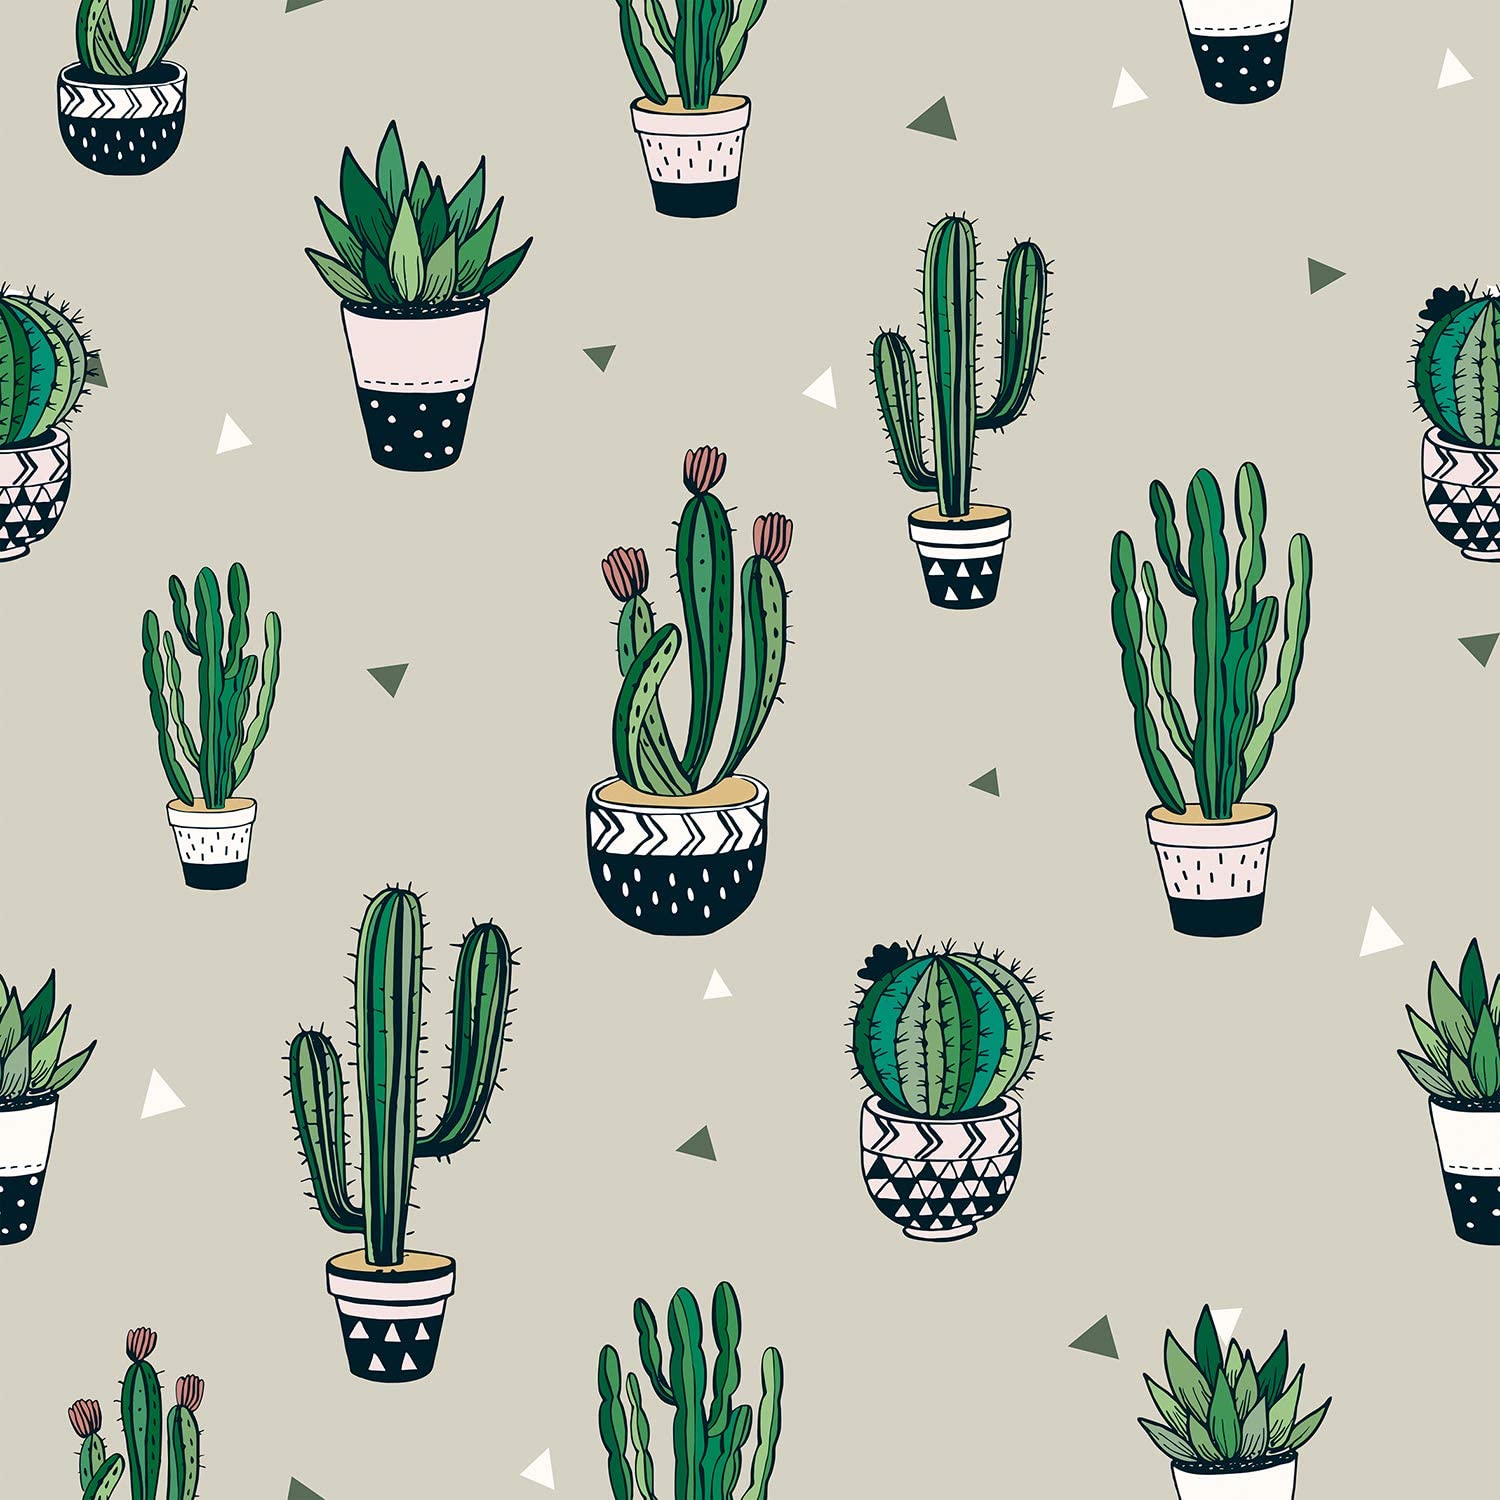 Cool Cactus Wallpaper Free Cool Cactus Background